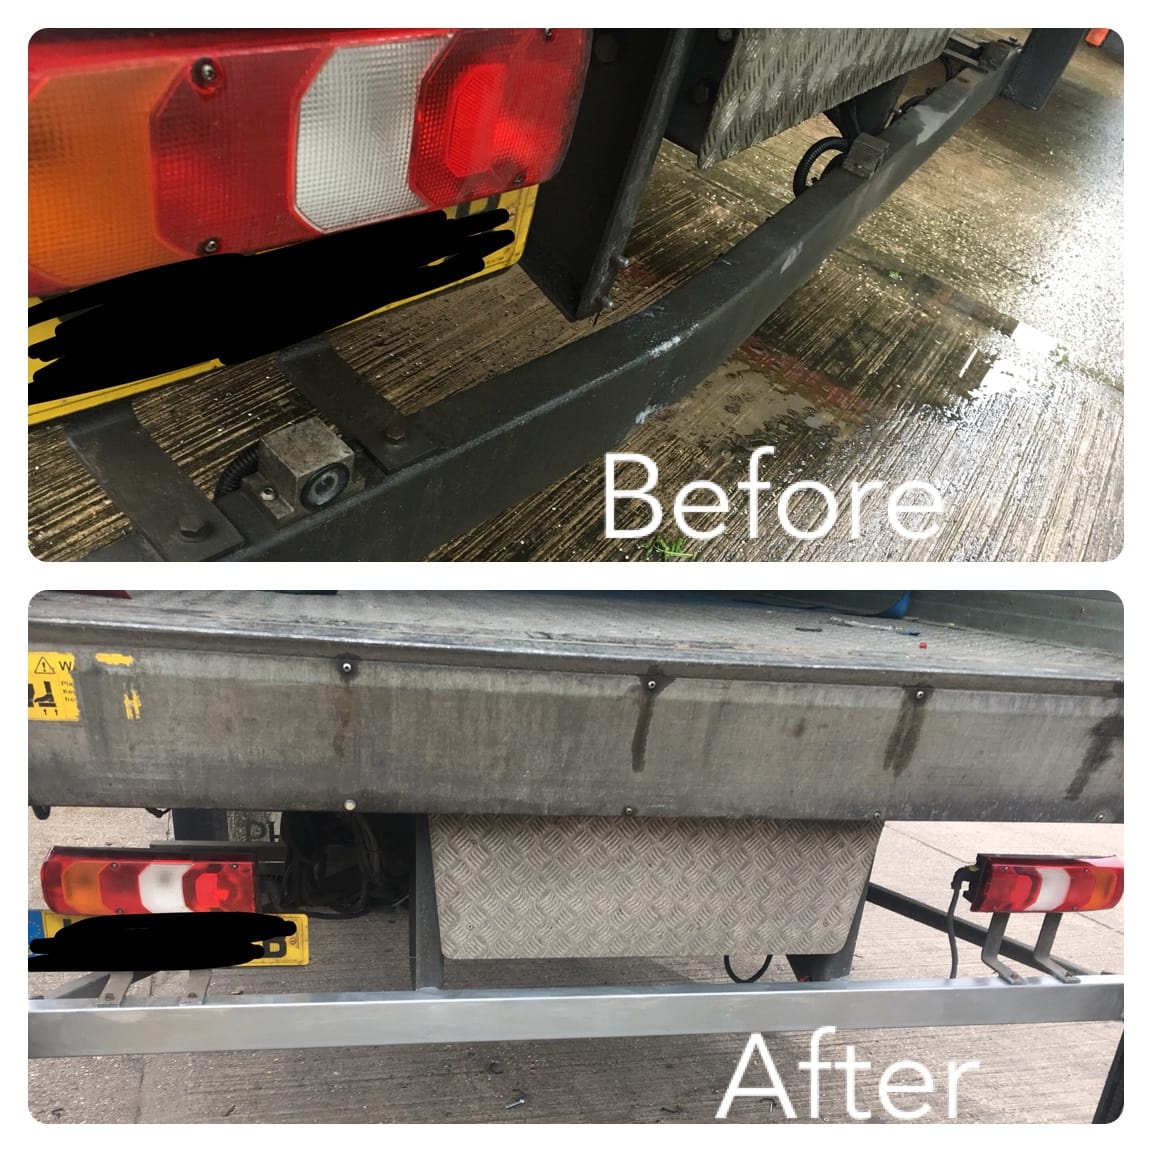 Indy-Go Tail Lift Repairs Ltd Sutton Coldfield 07552 355693